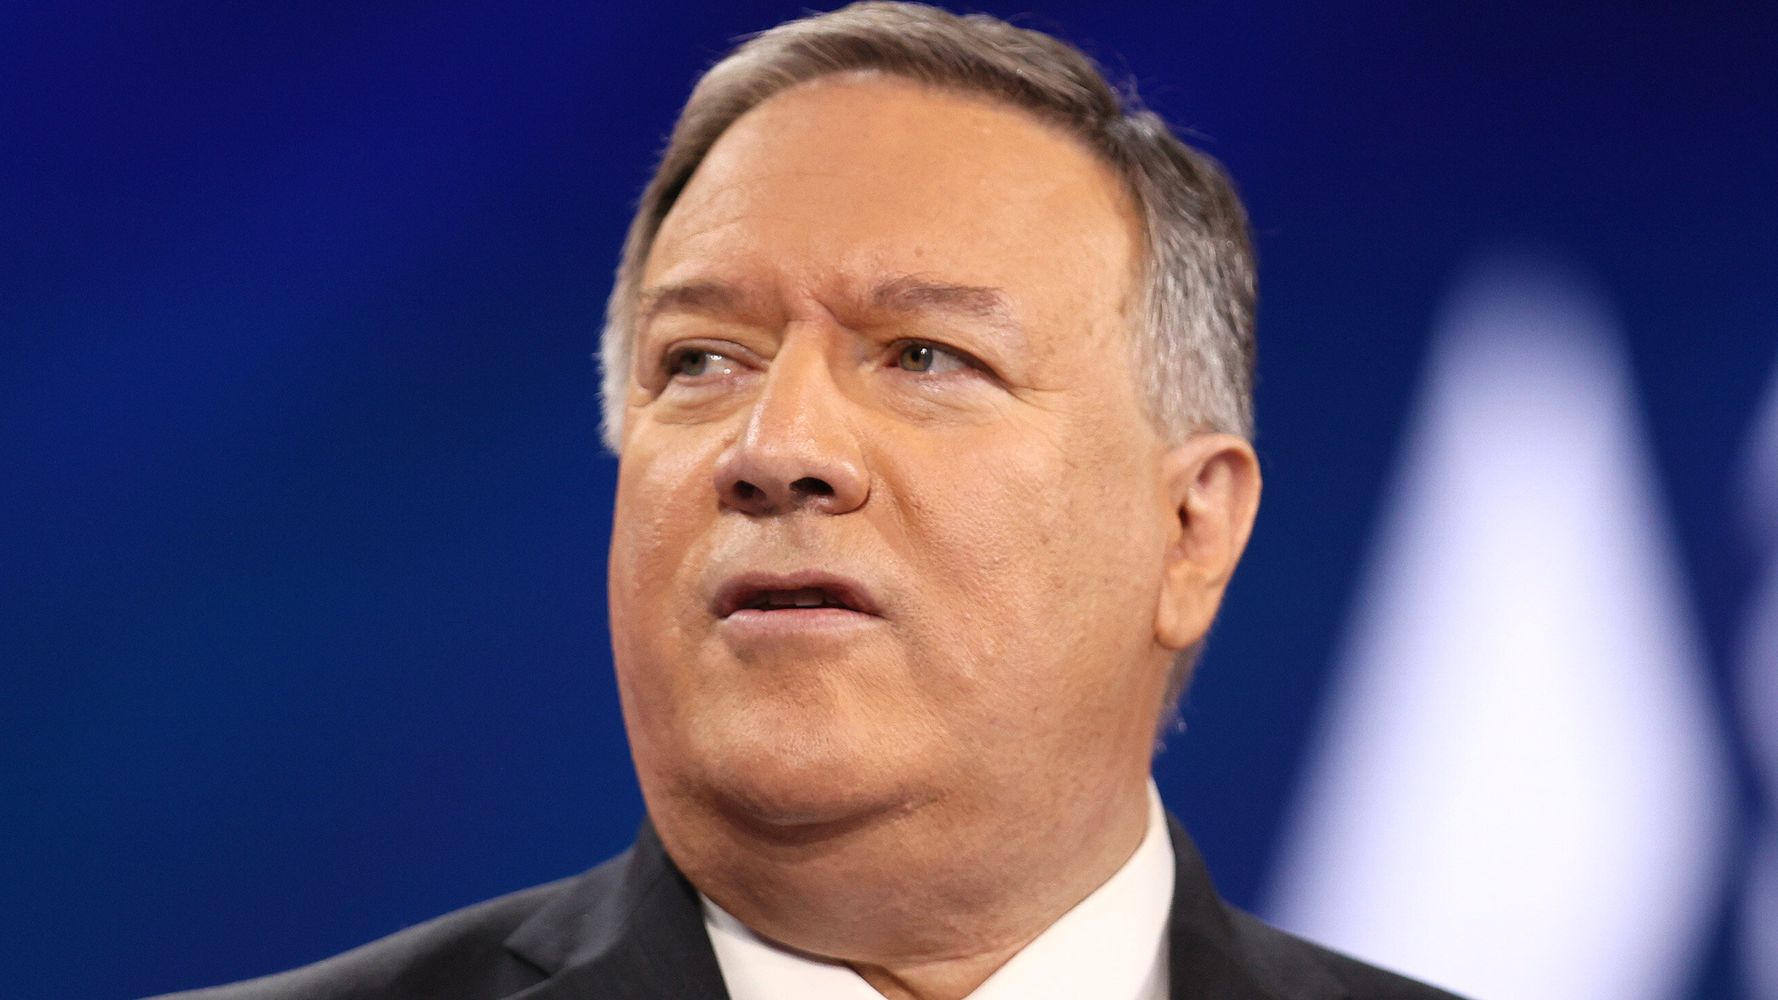 Mike Pompeo Proposes New Way Of Teaching And Gets Schooled Big Time